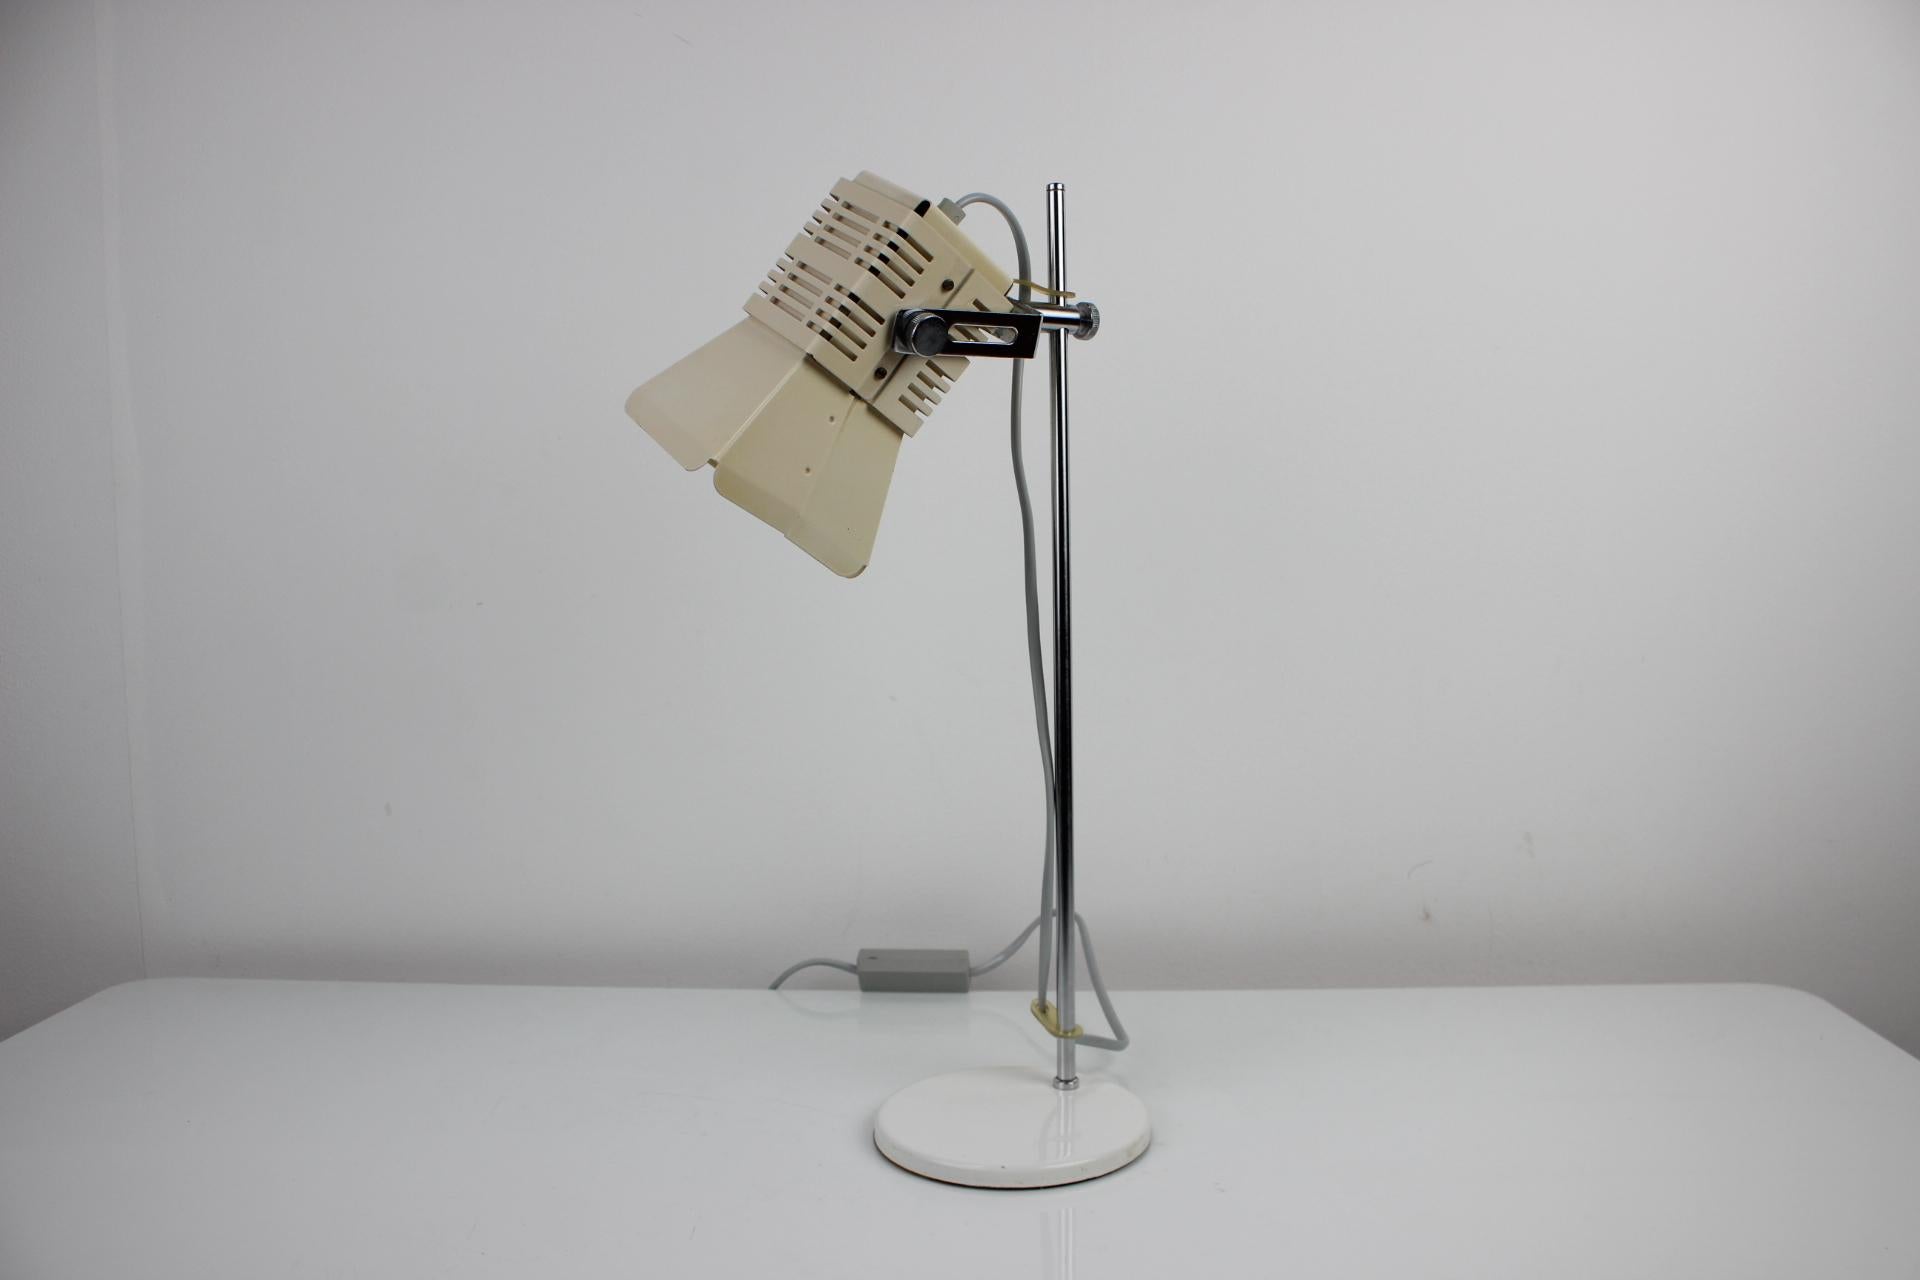 Made in Czechoslovakia
Made of painted metal, chrome
Adjustable shade
Has signs of use
Bulb 1x60W, E27 or E26
American adapter included
Original state.